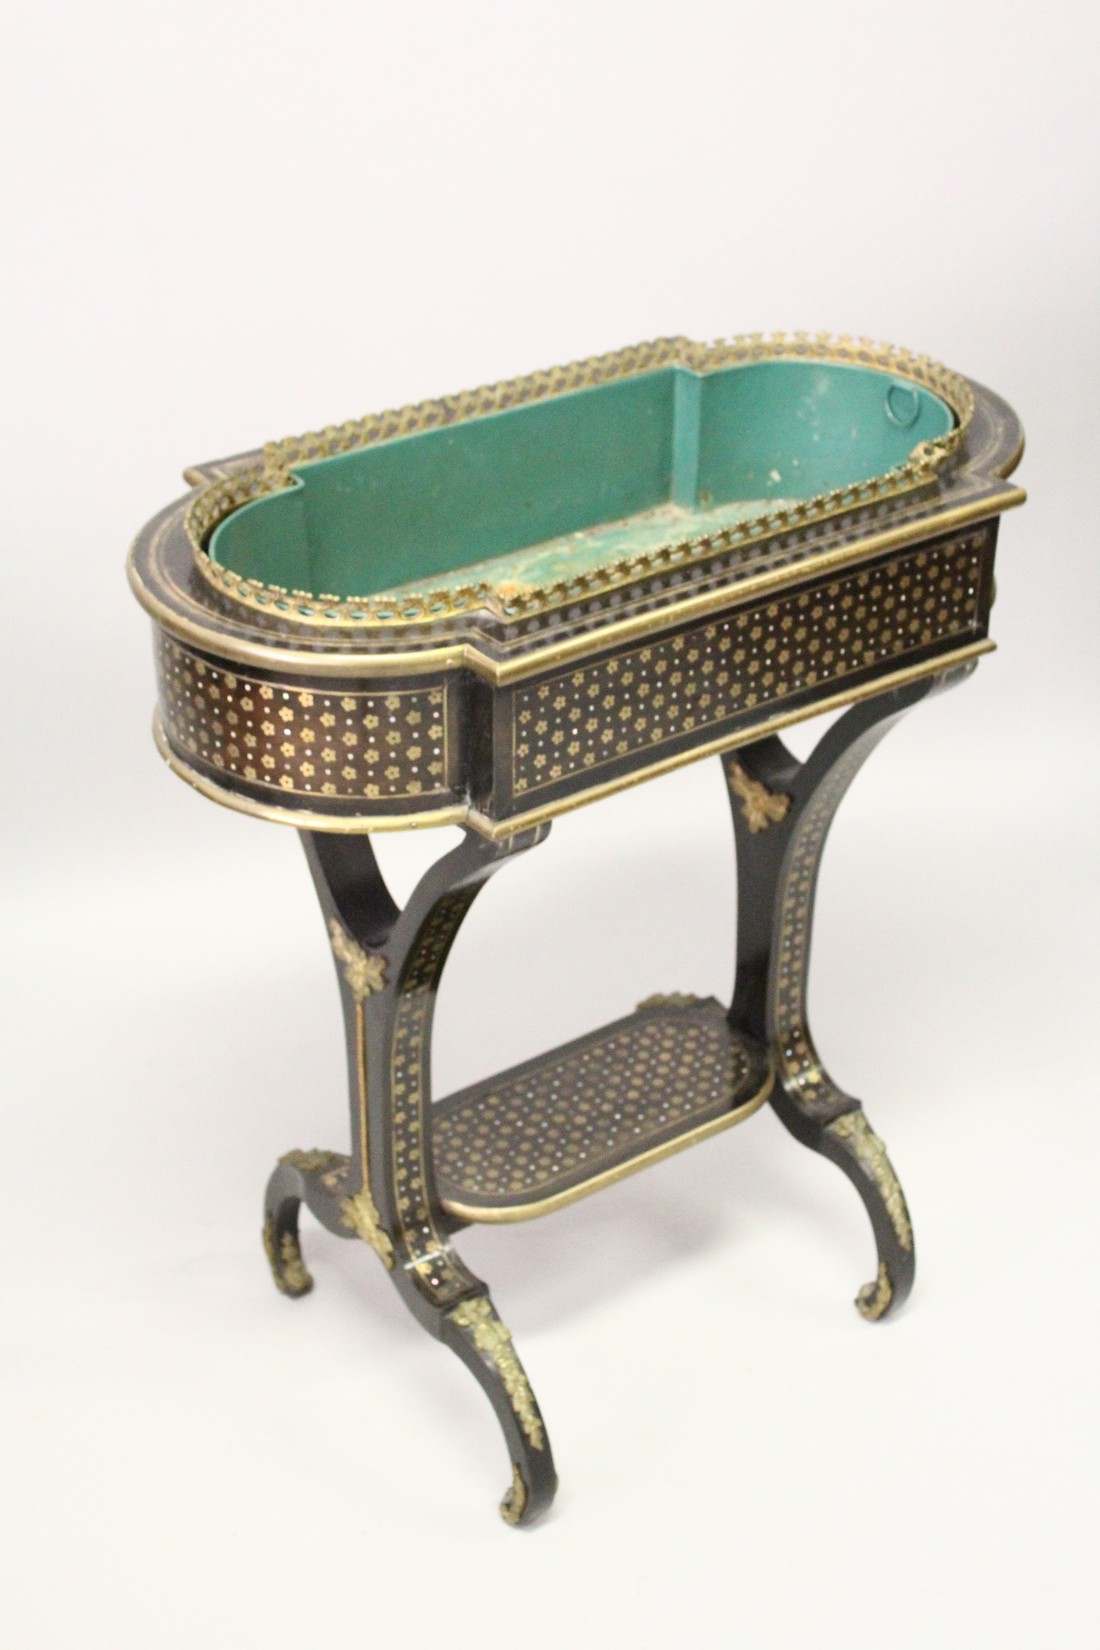 A VERY GOOD FRENCH 18TH /19TH CENTURY INLAID PLANTER, with brass grill, metal liner on curving end - Image 5 of 5